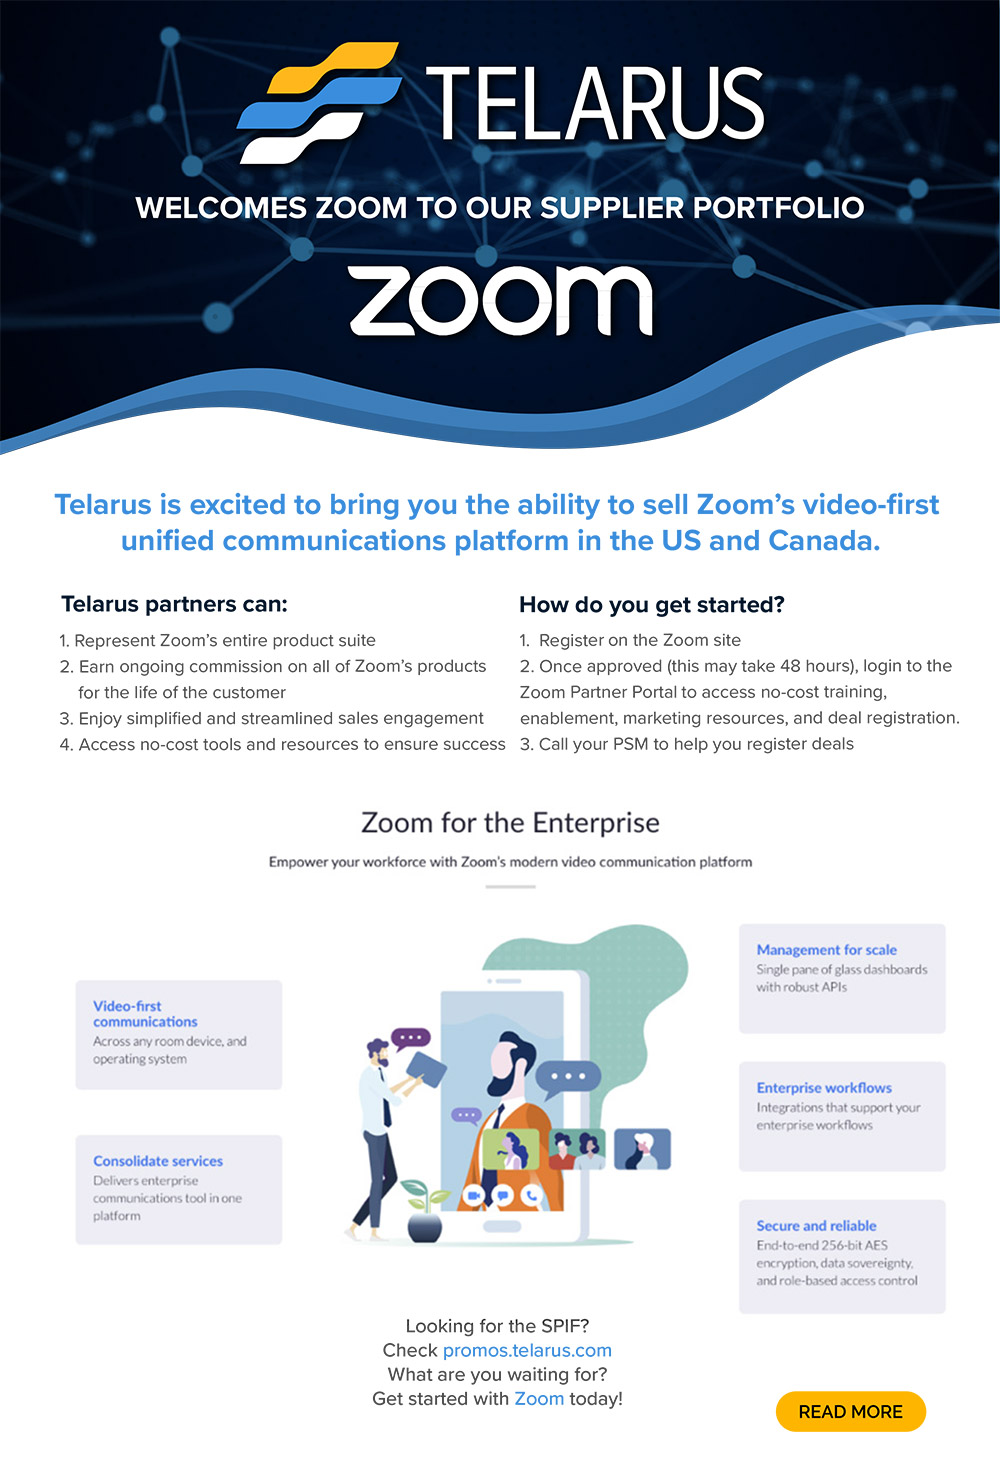 TELARUS welcomes Zoom to our supplier portfolio